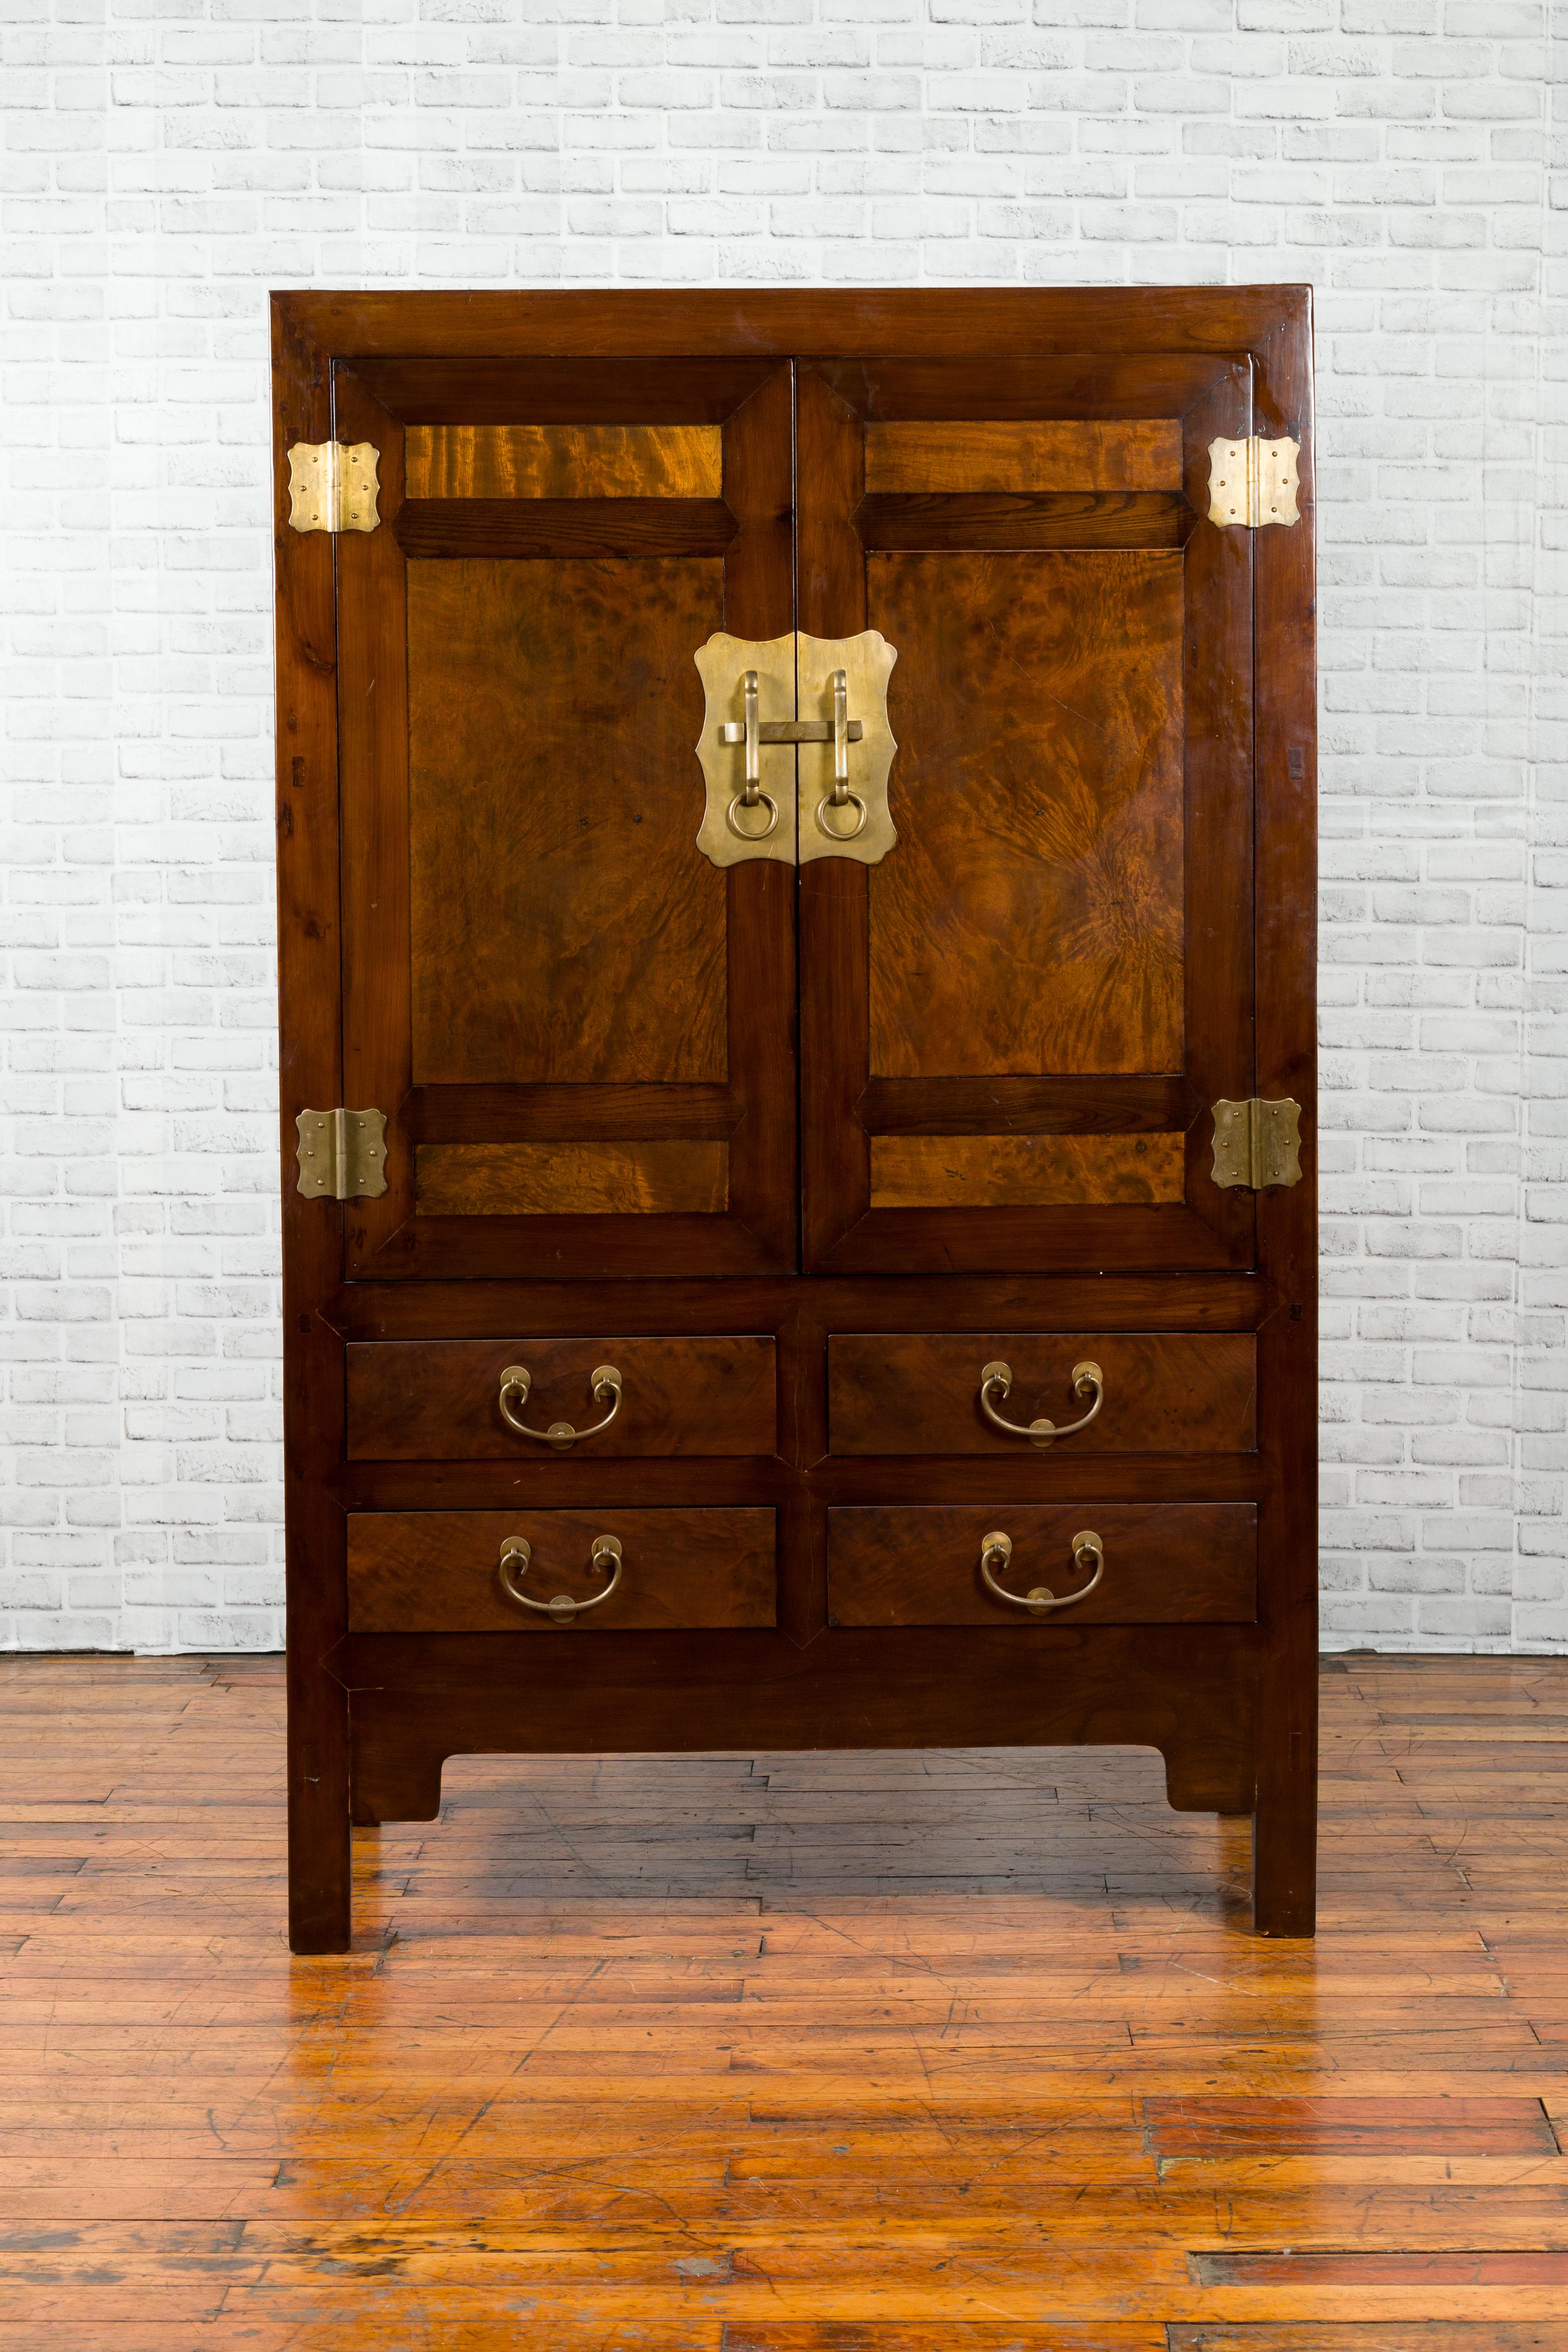 Chinese 1920s-1930s Elm and Burl Cabinet with Doors, Drawers and Brass Hardware For Sale 4